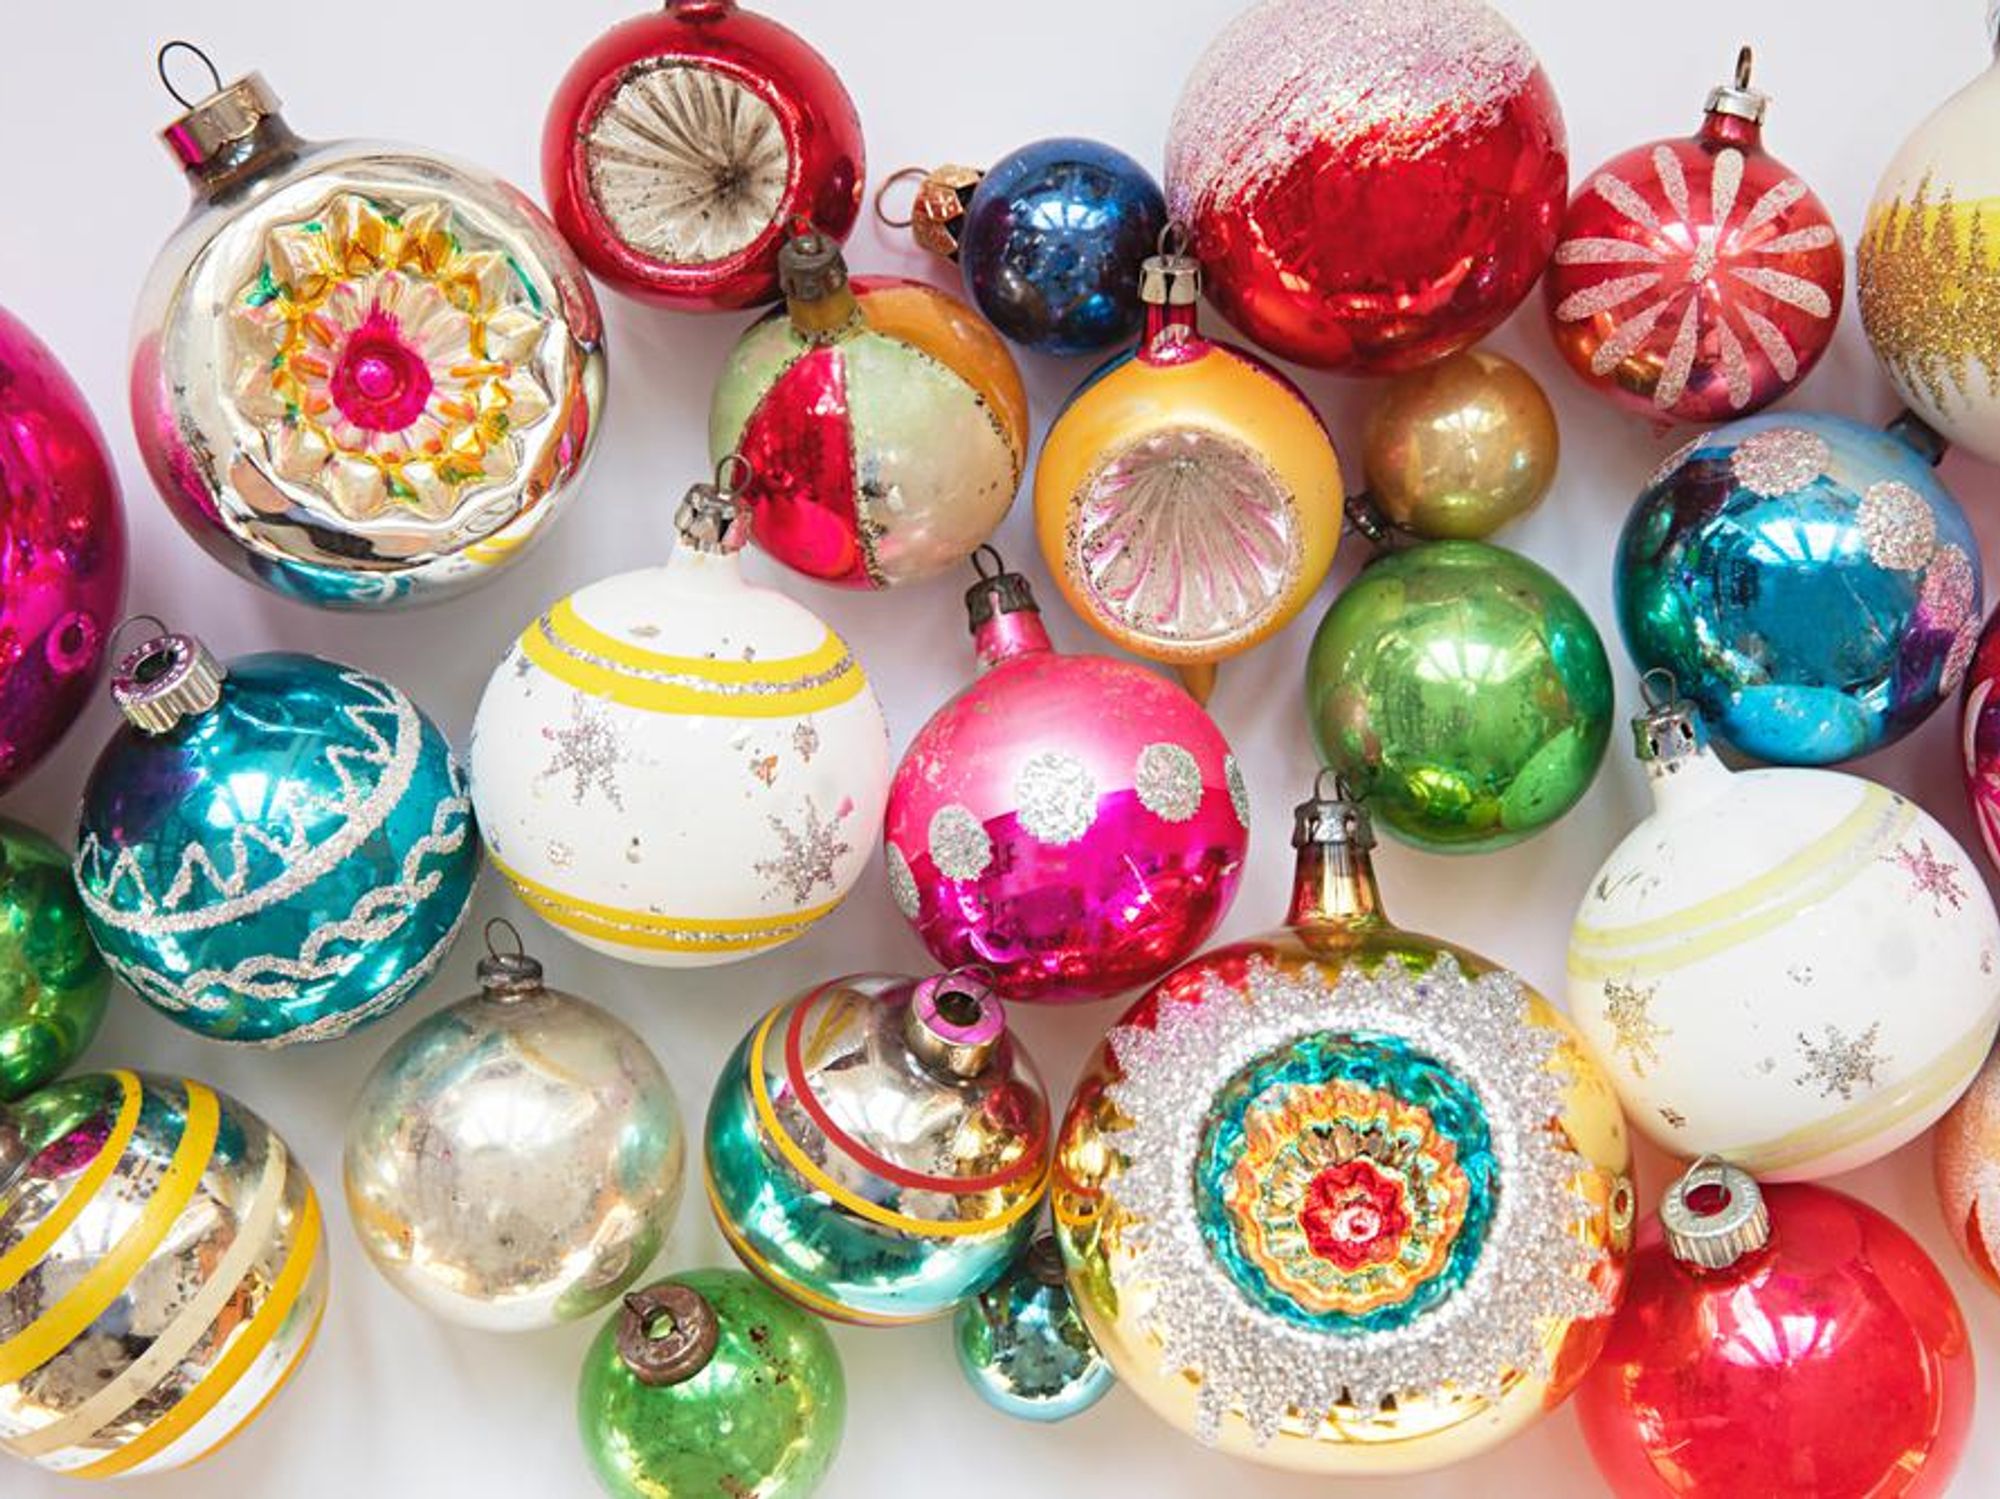 These are the ornaments we really want on our Christmas tree